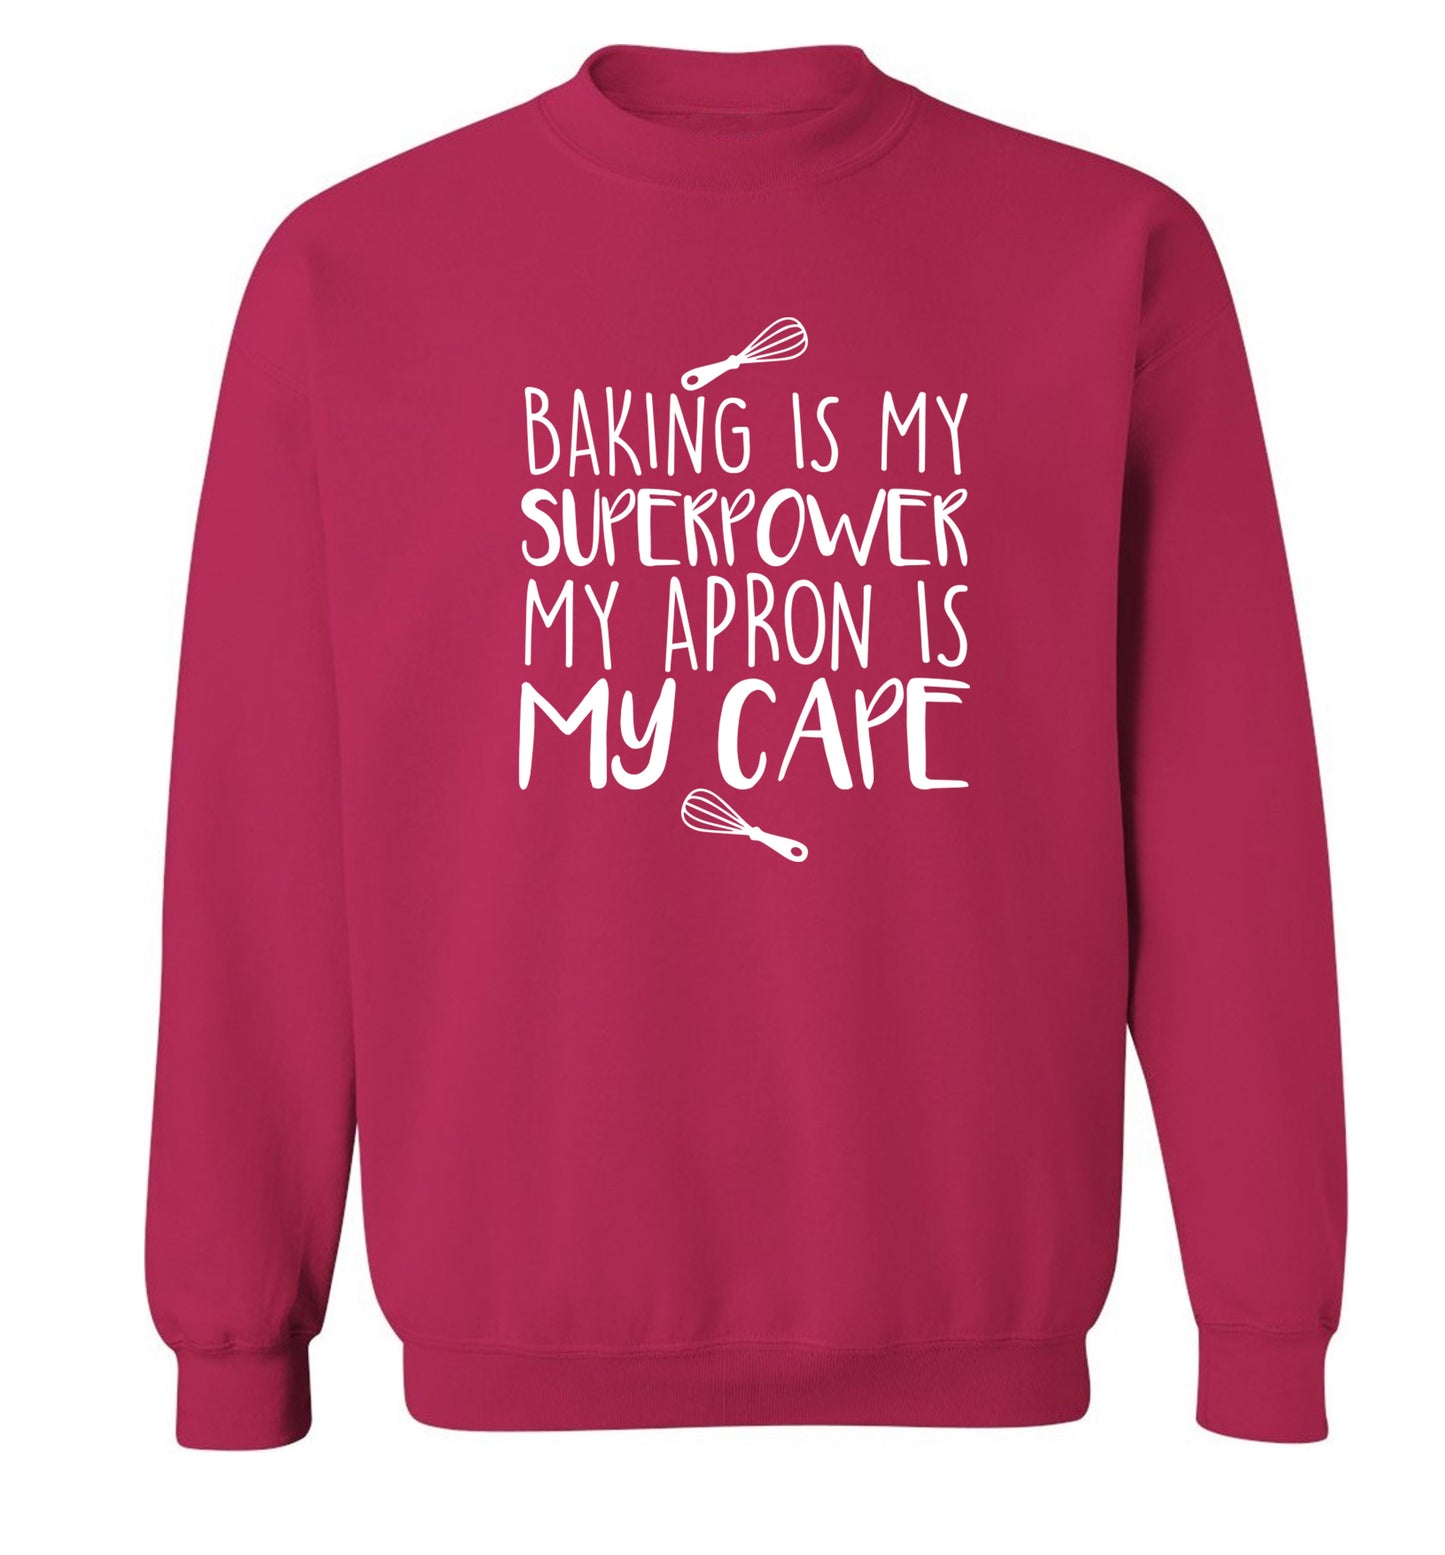 Baking is my superpower my apron is my cape Adult's unisex pink Sweater 2XL